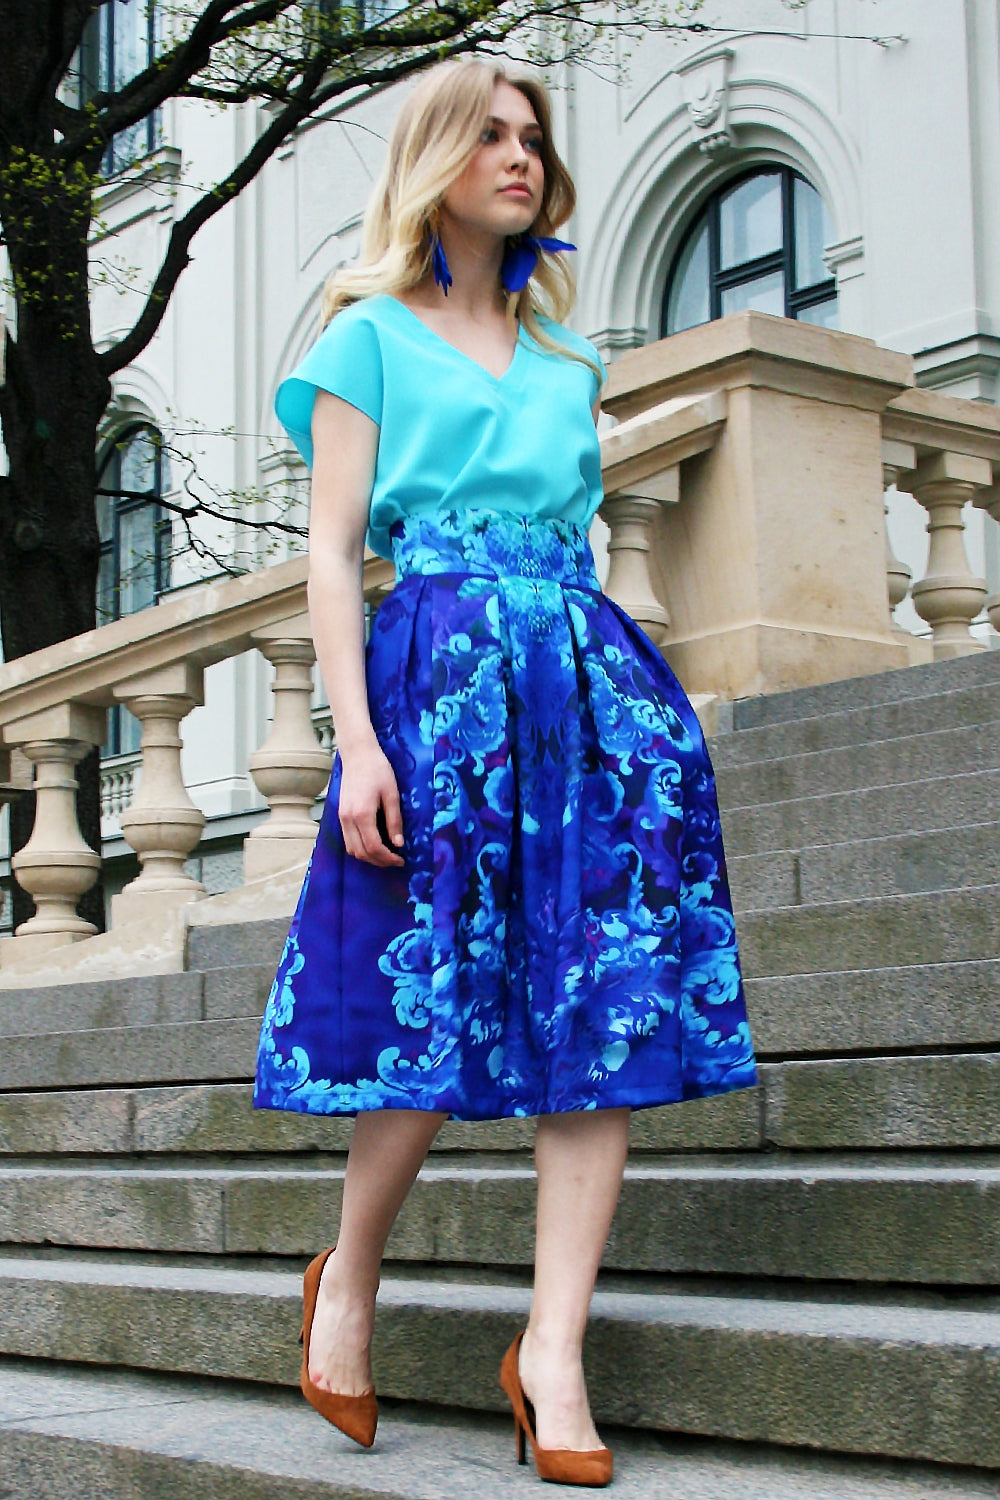 Thick blue skirt with a baroque ornament